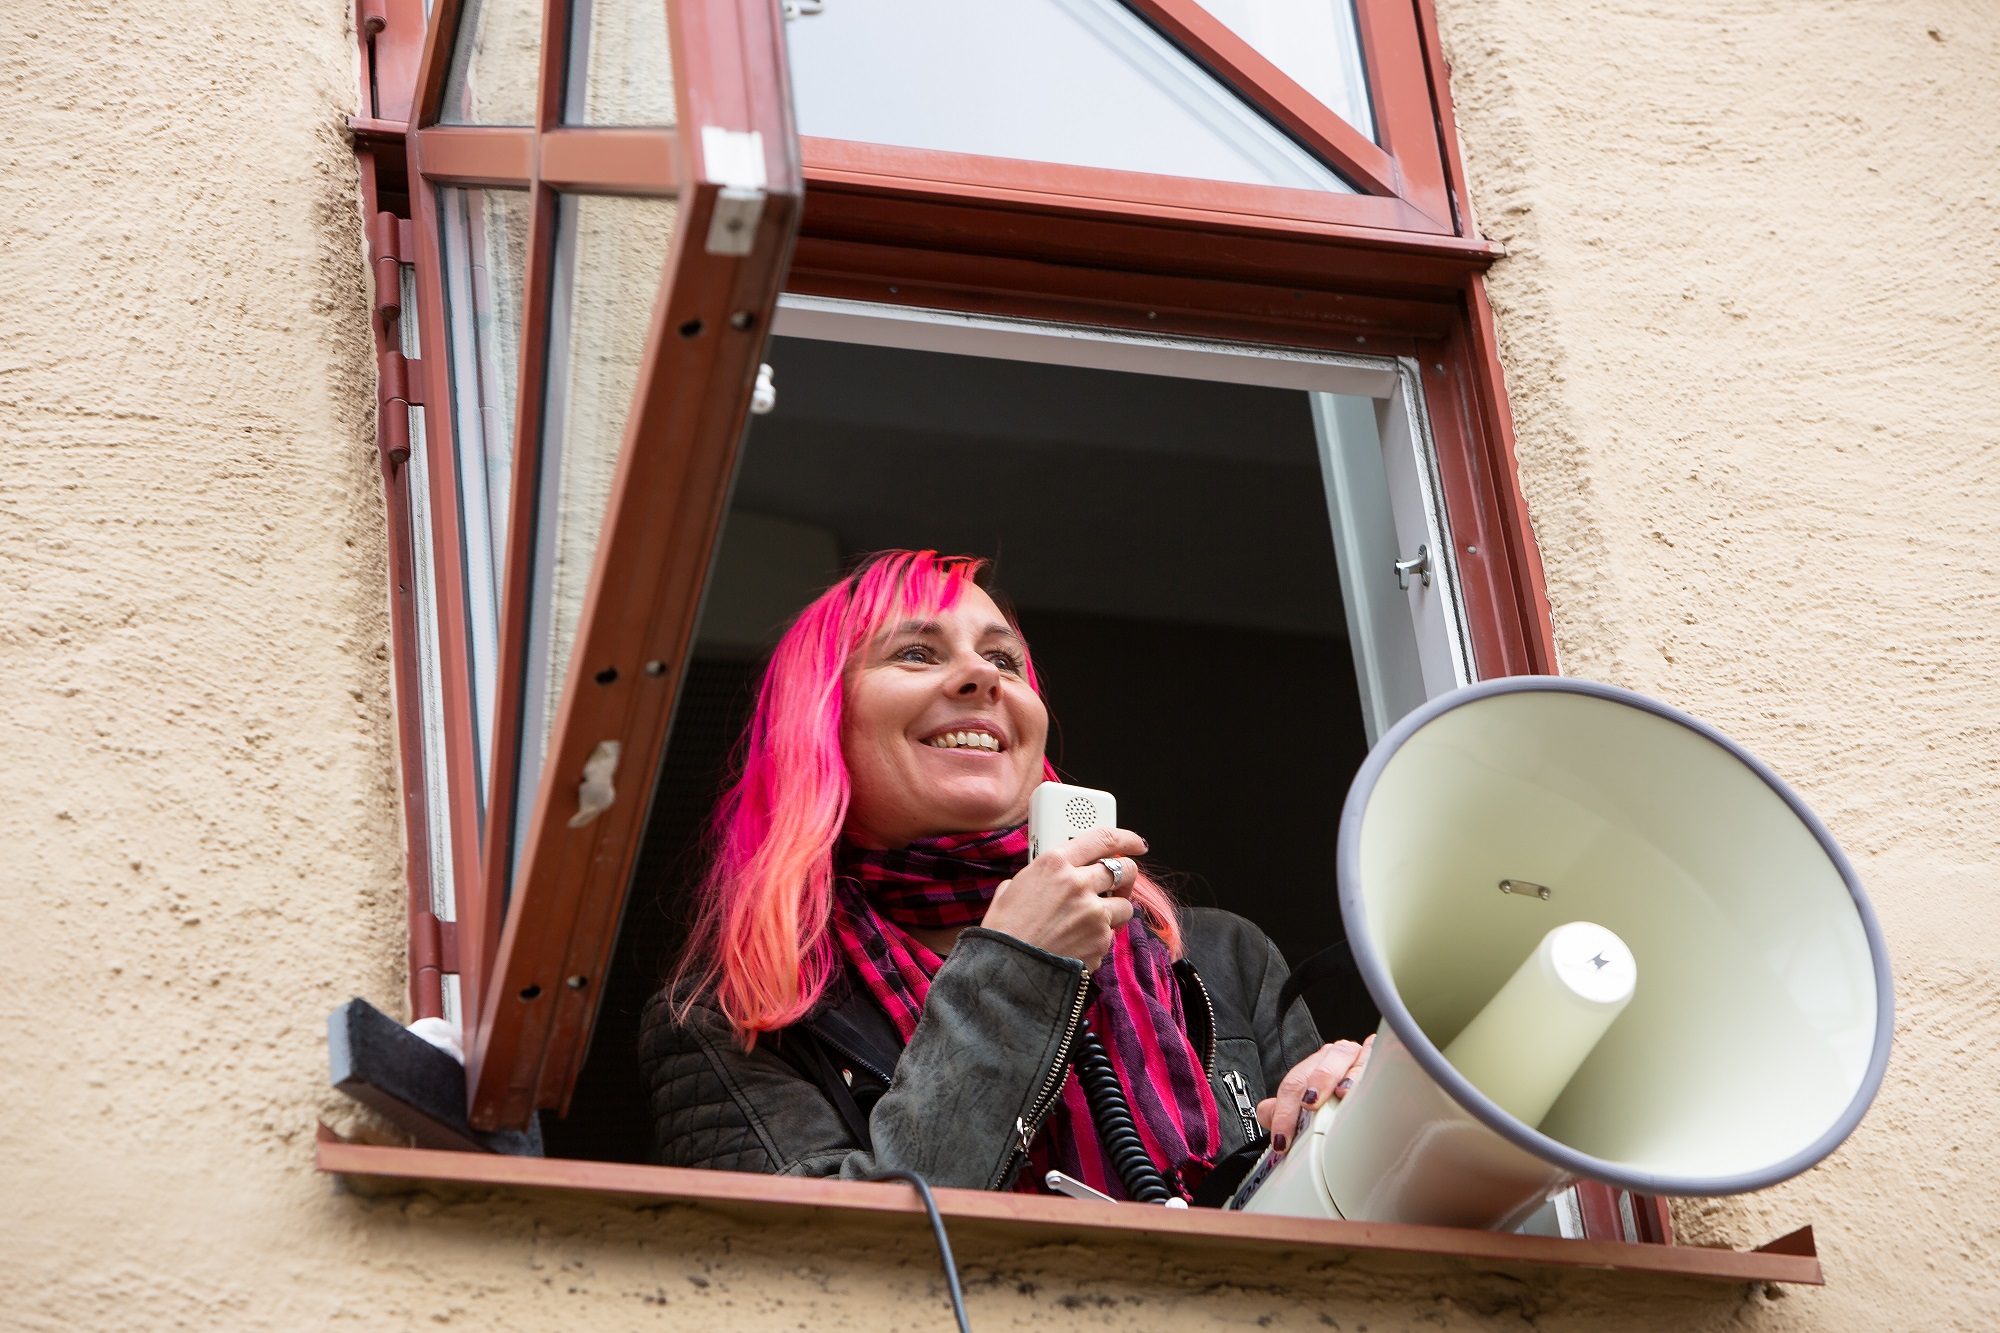 A smiling woman with pink hair holds a megaphone through an open window.